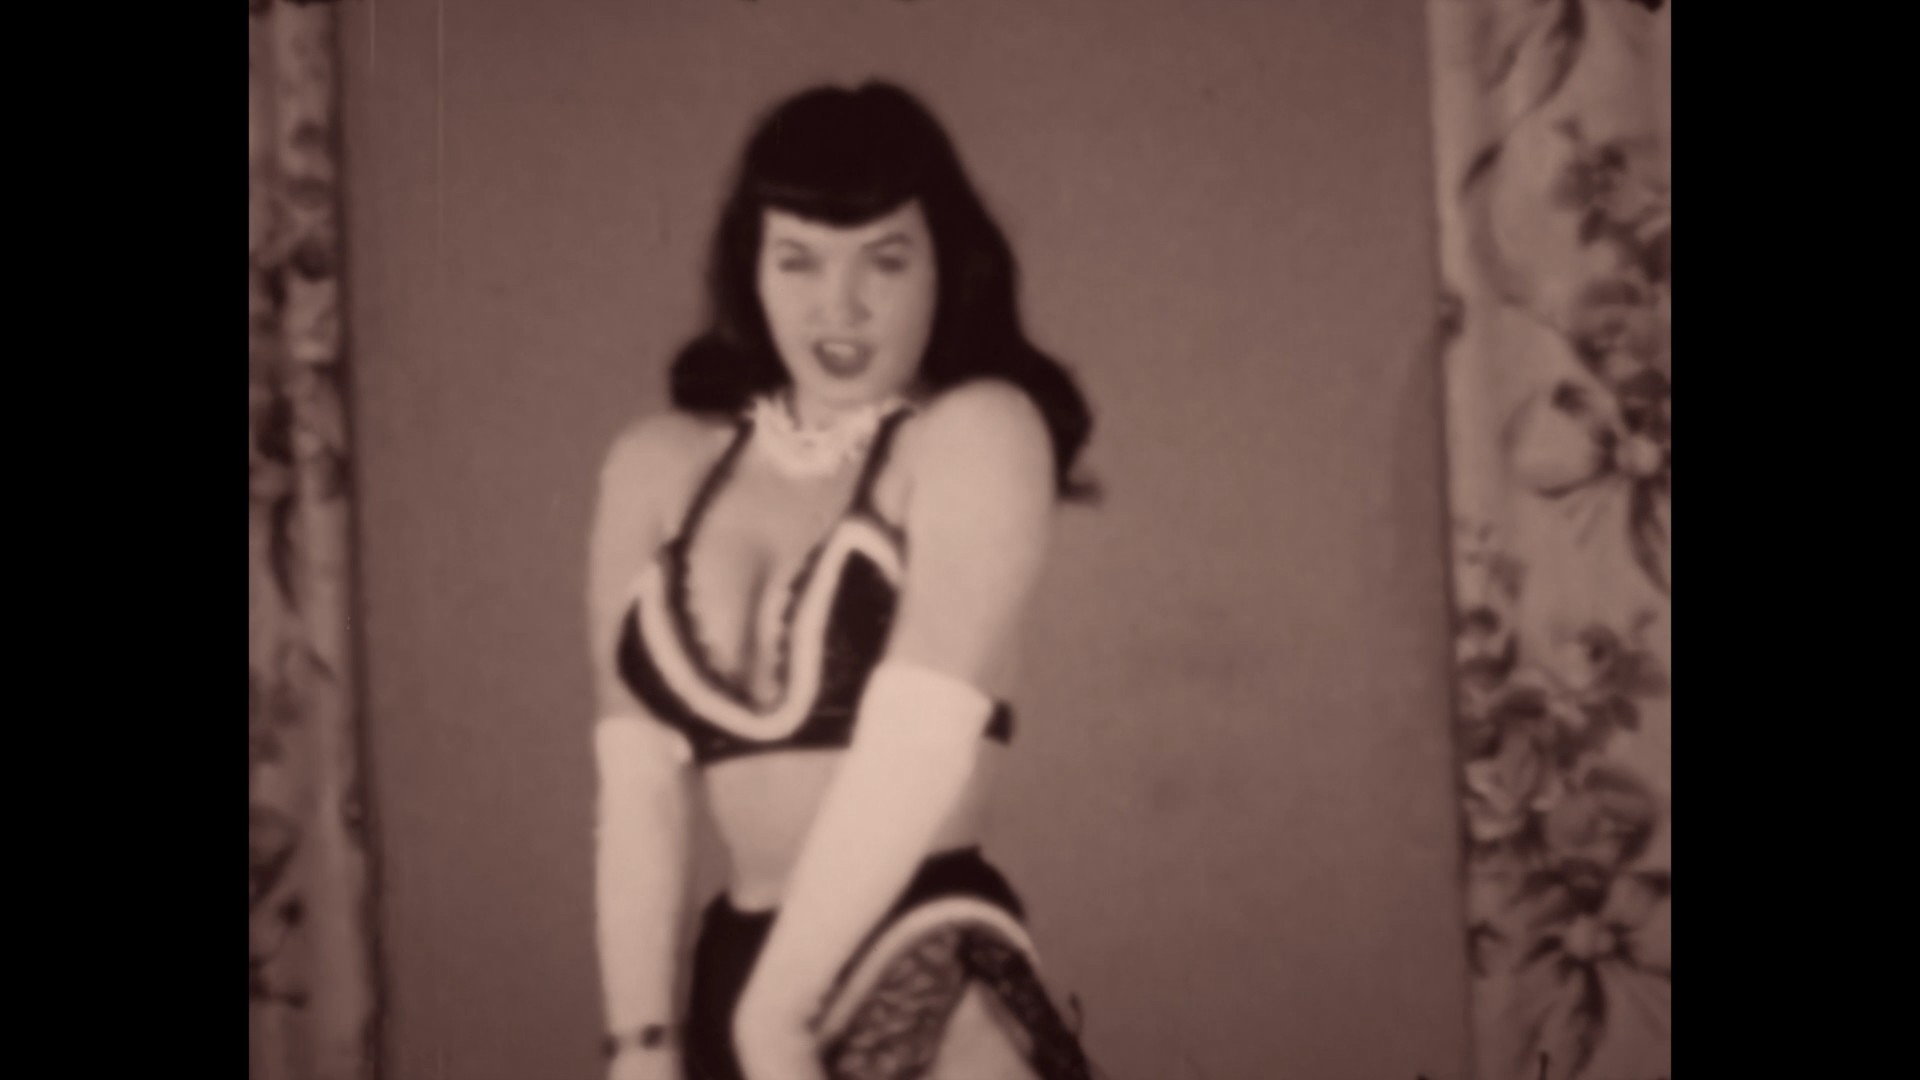 EXOTIC DANCES OF BETTIE PAGE, THE 18